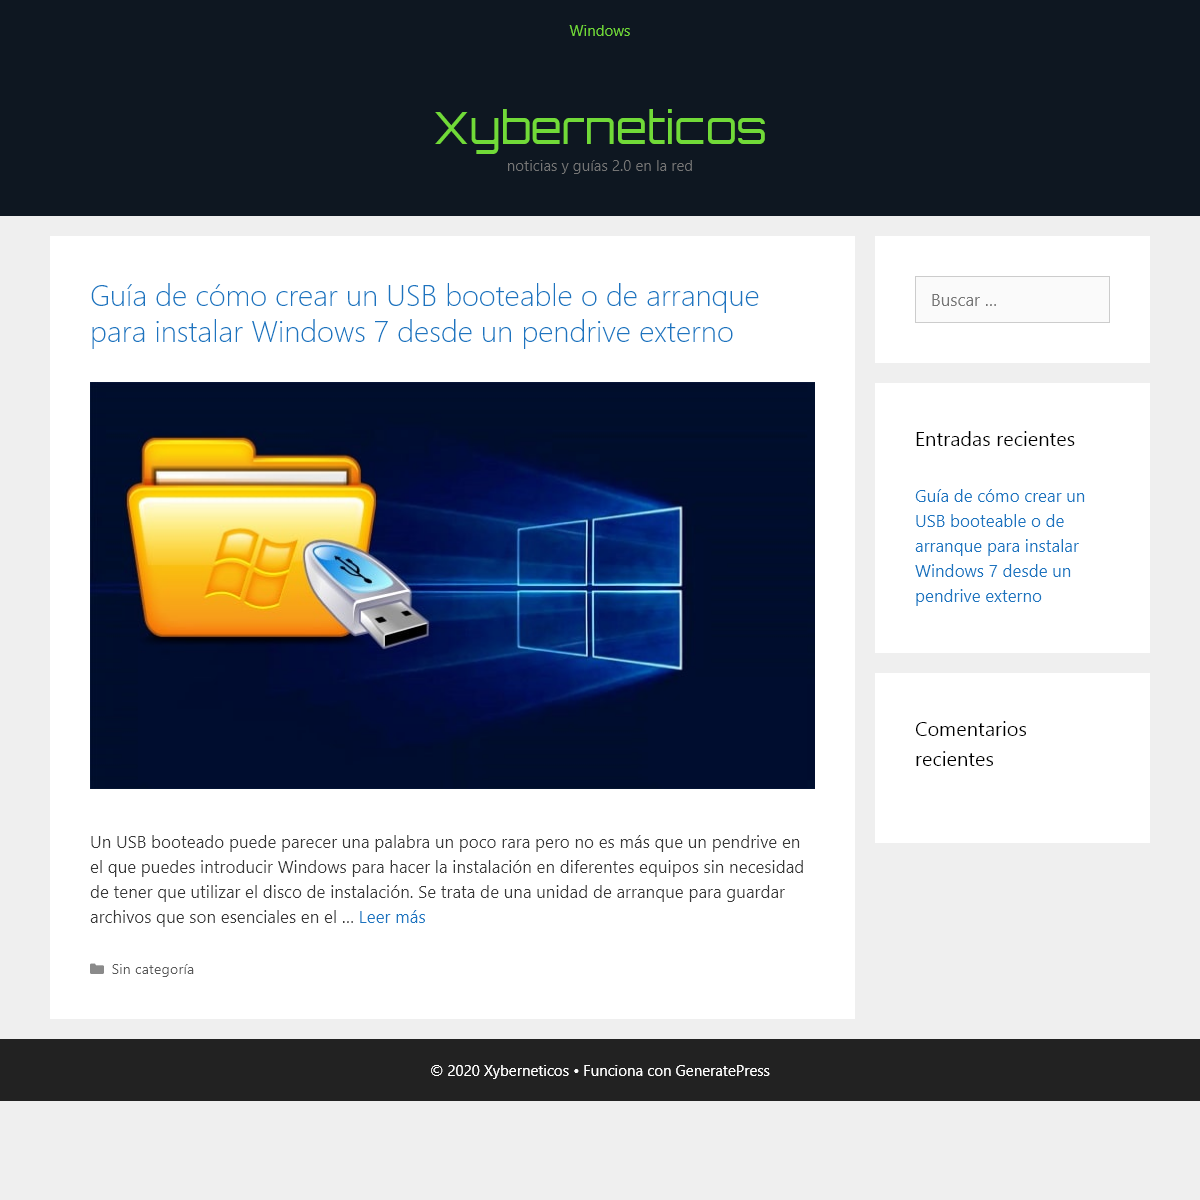 A complete backup of xyberneticos.com